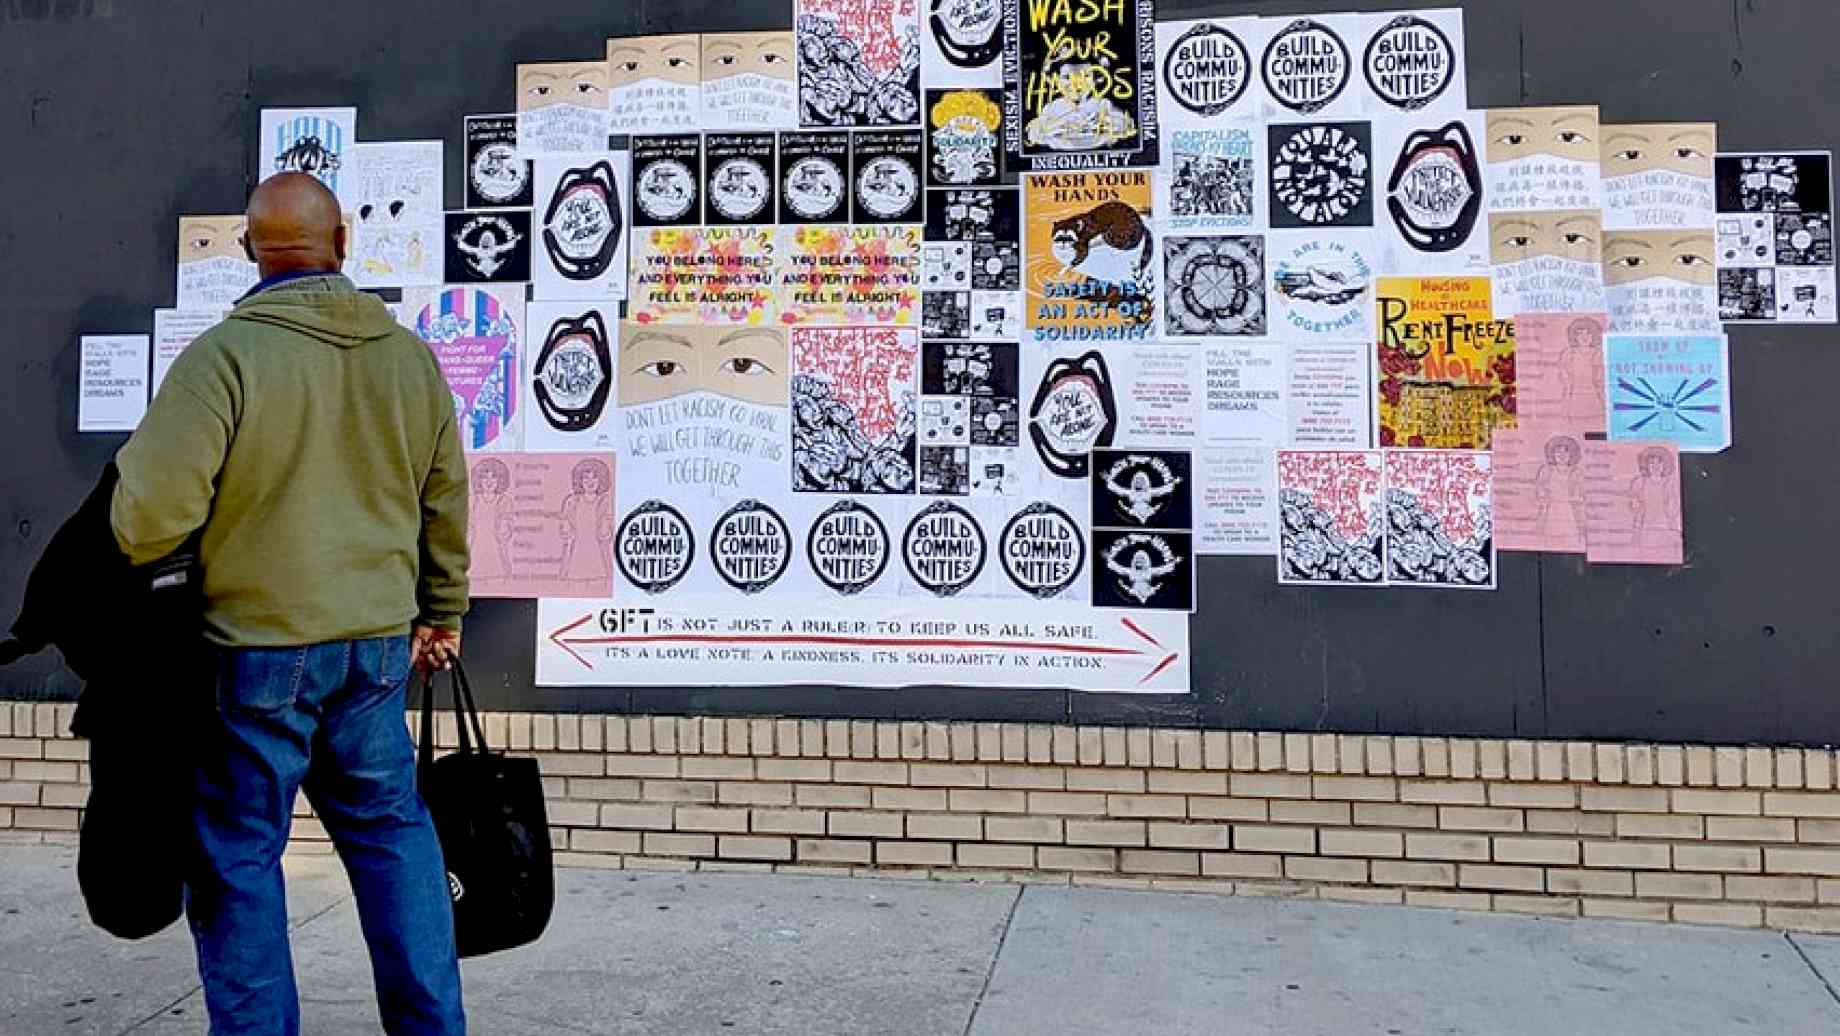 Artist Mark Strandquist and collaborators in Philadelphia are calling on fellow artists to submit their work in the context of the COVID19 crisis for distribution throughout their city. Image source: https://coverthewallswithhope.weebly.com/